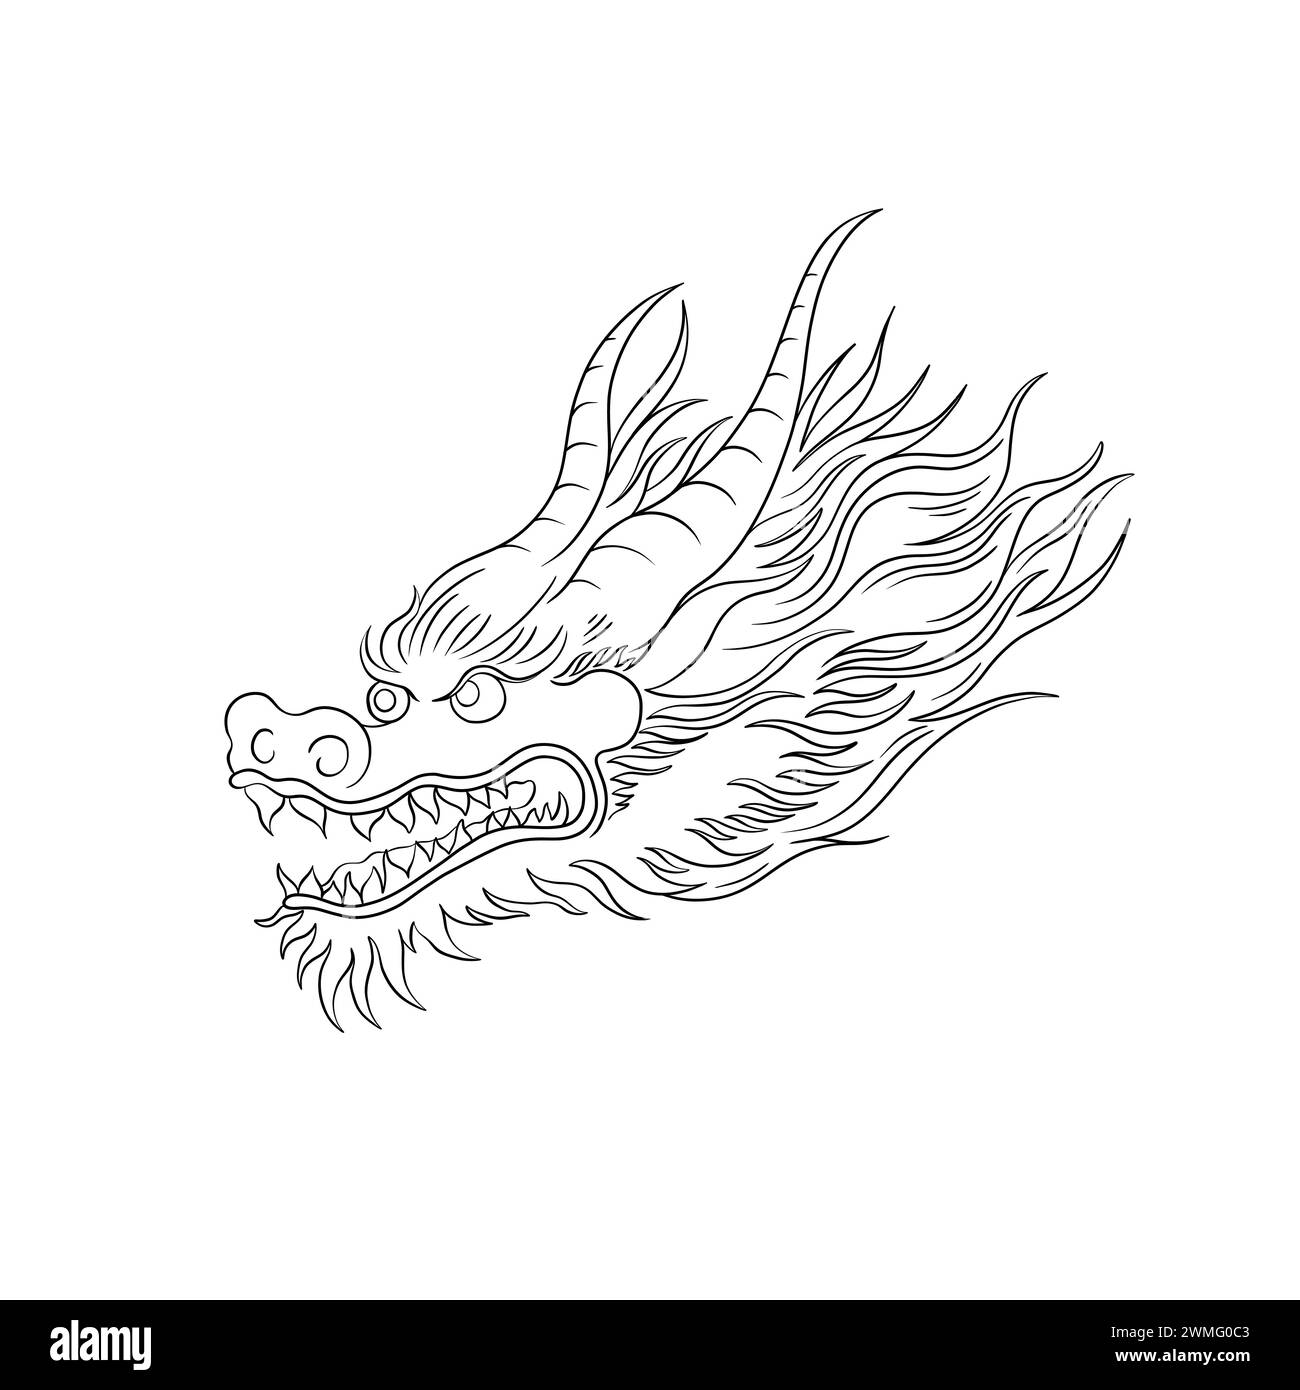 Oriental Chinese vector dragon head. Traditional symbol of the Chinese zodiac. The serpent dragon is made in a linear hand-drawn style. Stock Vector